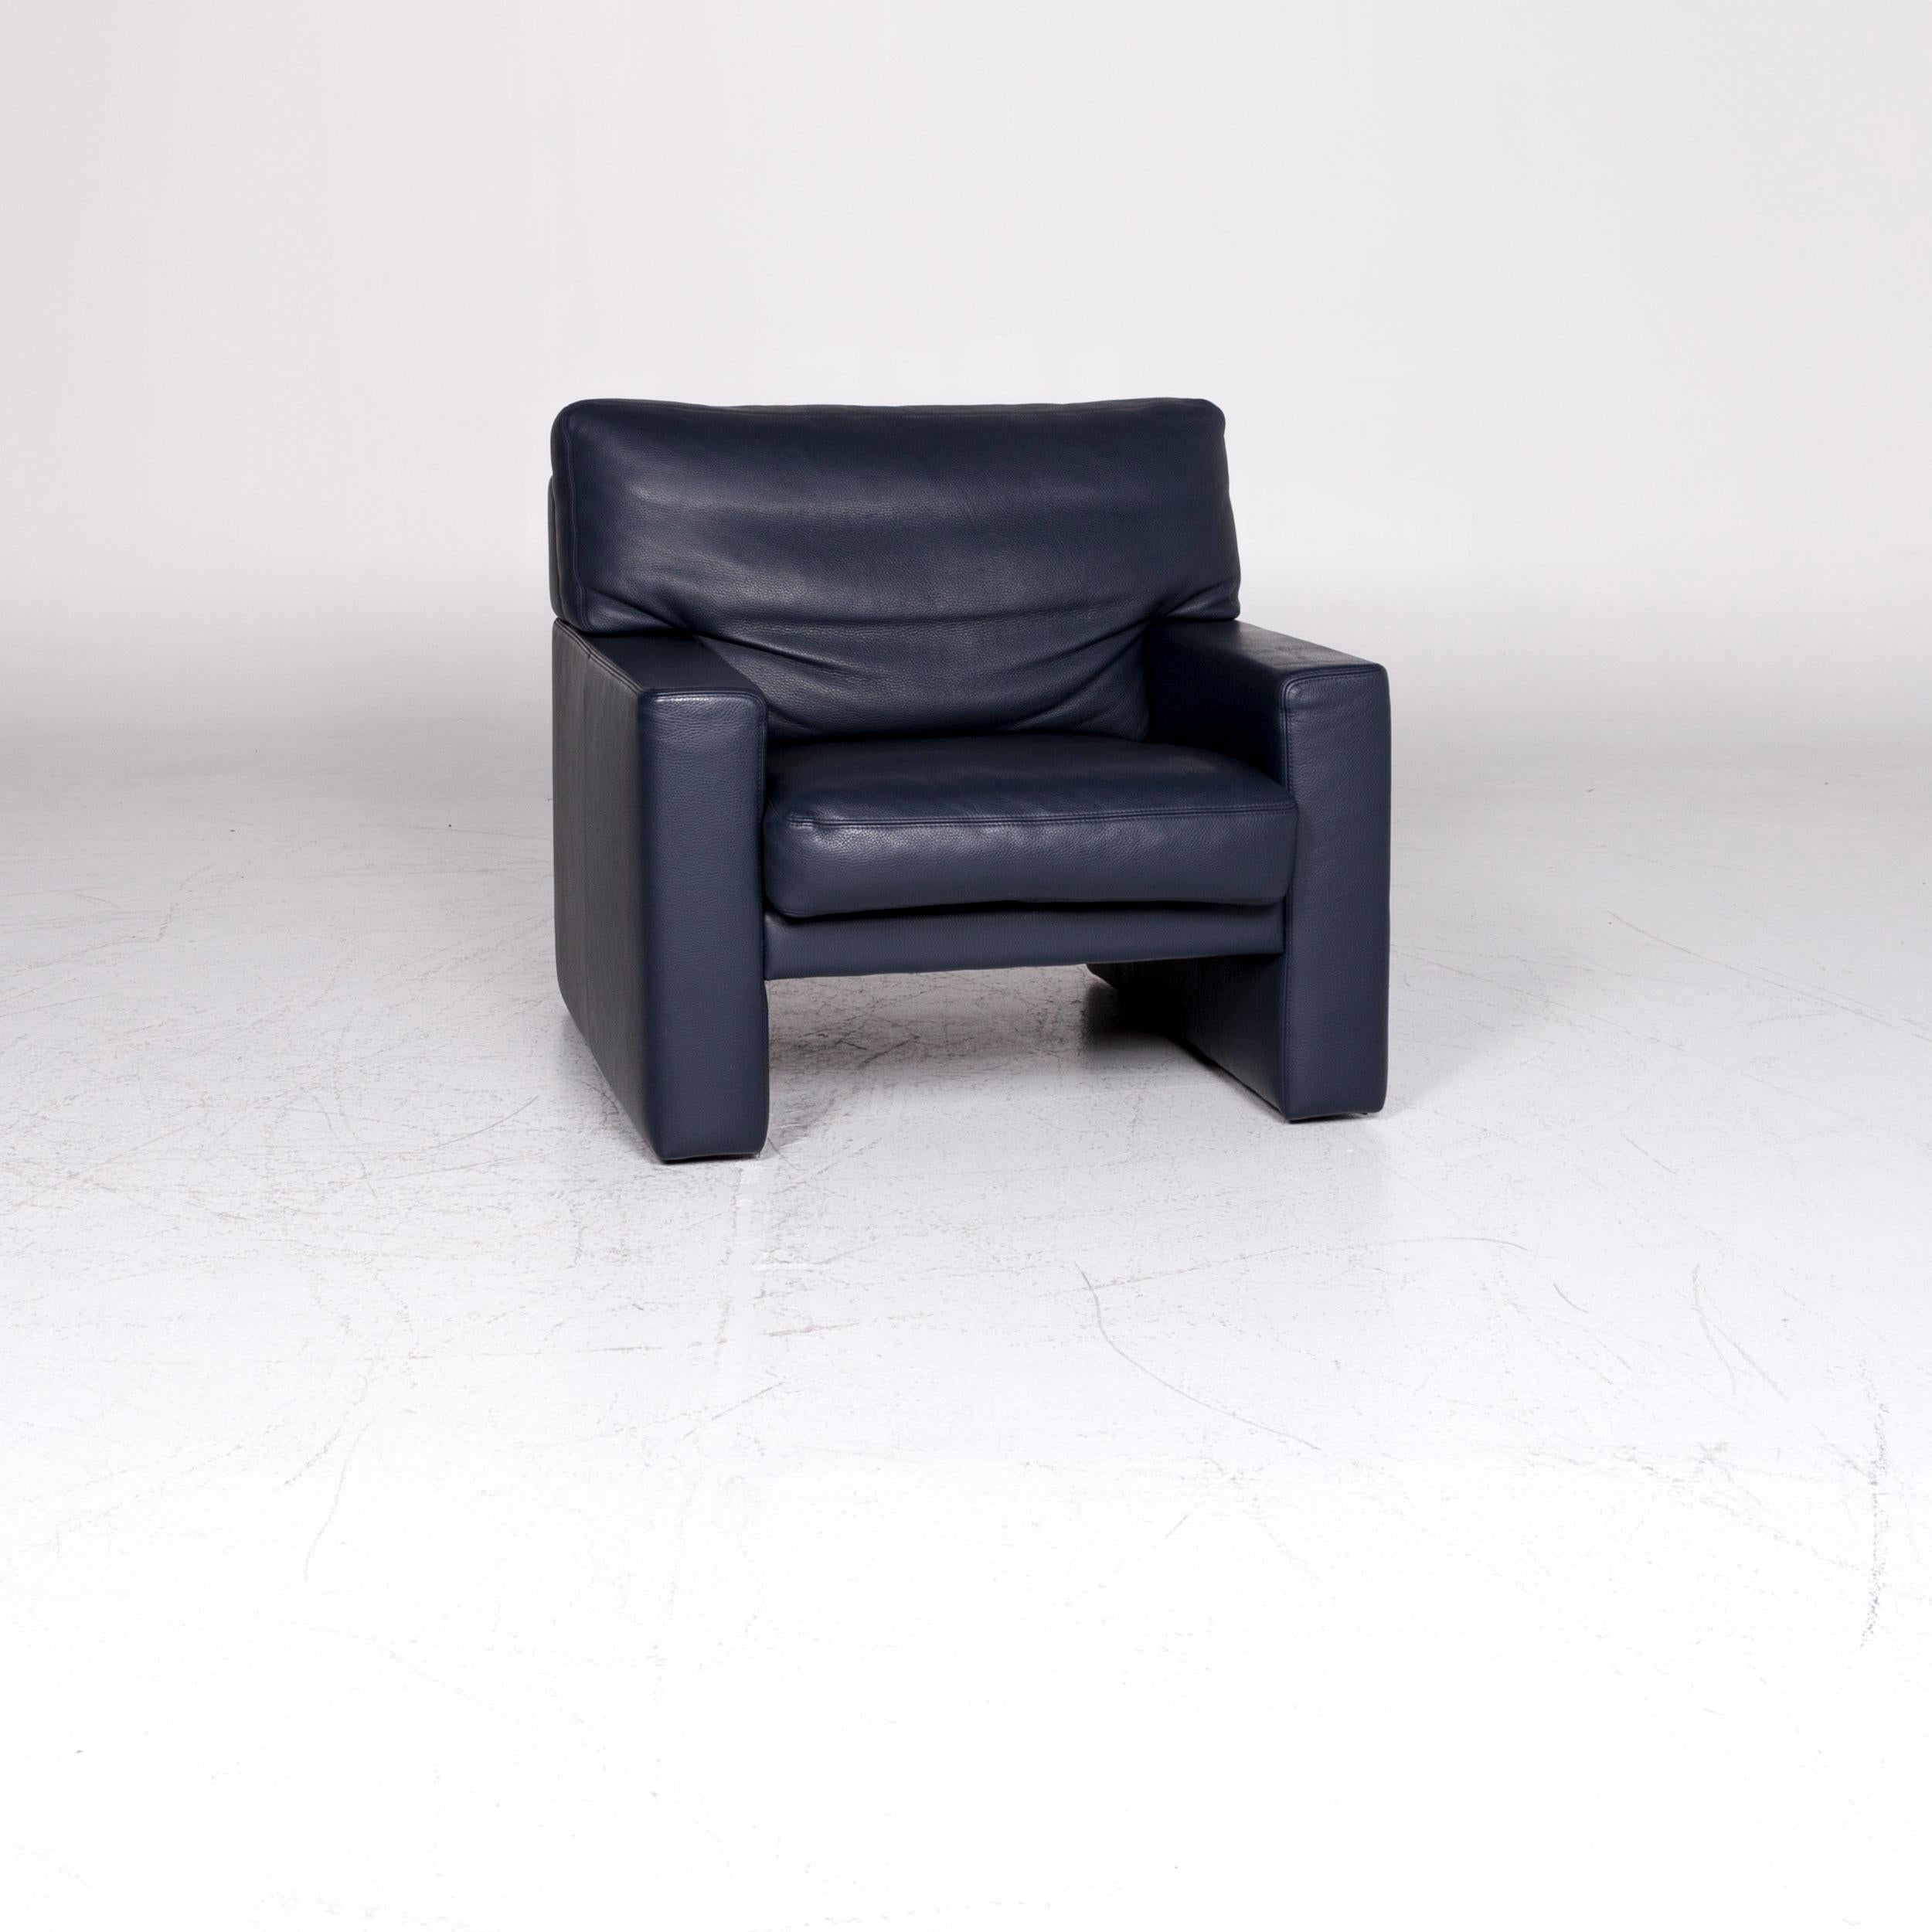 We bring to you an Erpo leather armchair blue.

 Product measurements in centimeters:
 
Depth: 92
Width: 86
Height: 78
Seat-height: 42
Rest-height: 51
Seat-depth: 48
Seat-width: 56
Back-height: 37.
 